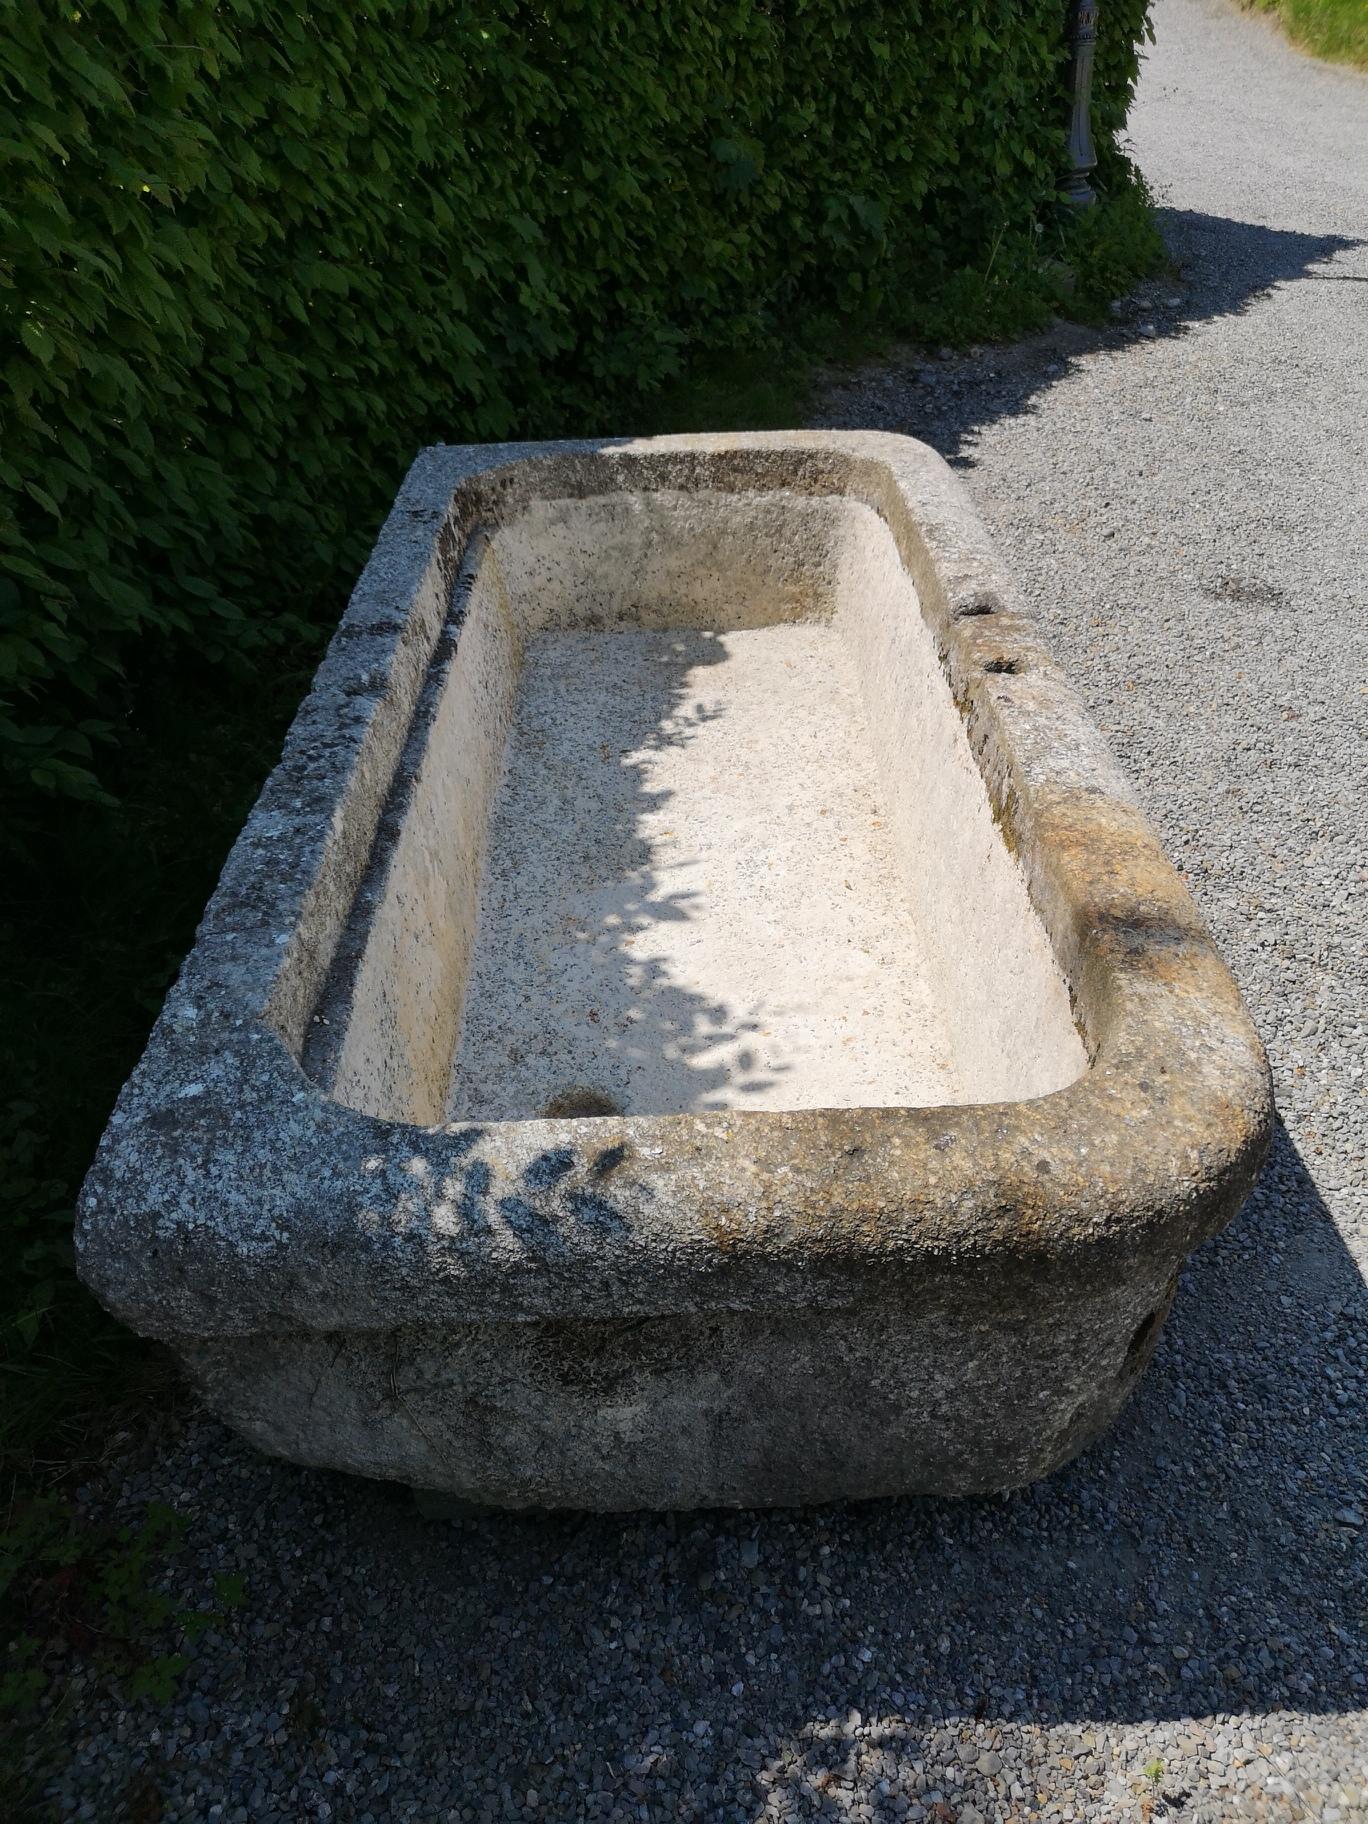 This huge granite well is in a good condition. The drain is not restored until now but it will be soon.
The well can also be used to take a bath in hot temperature. Nice and extraordinary form.